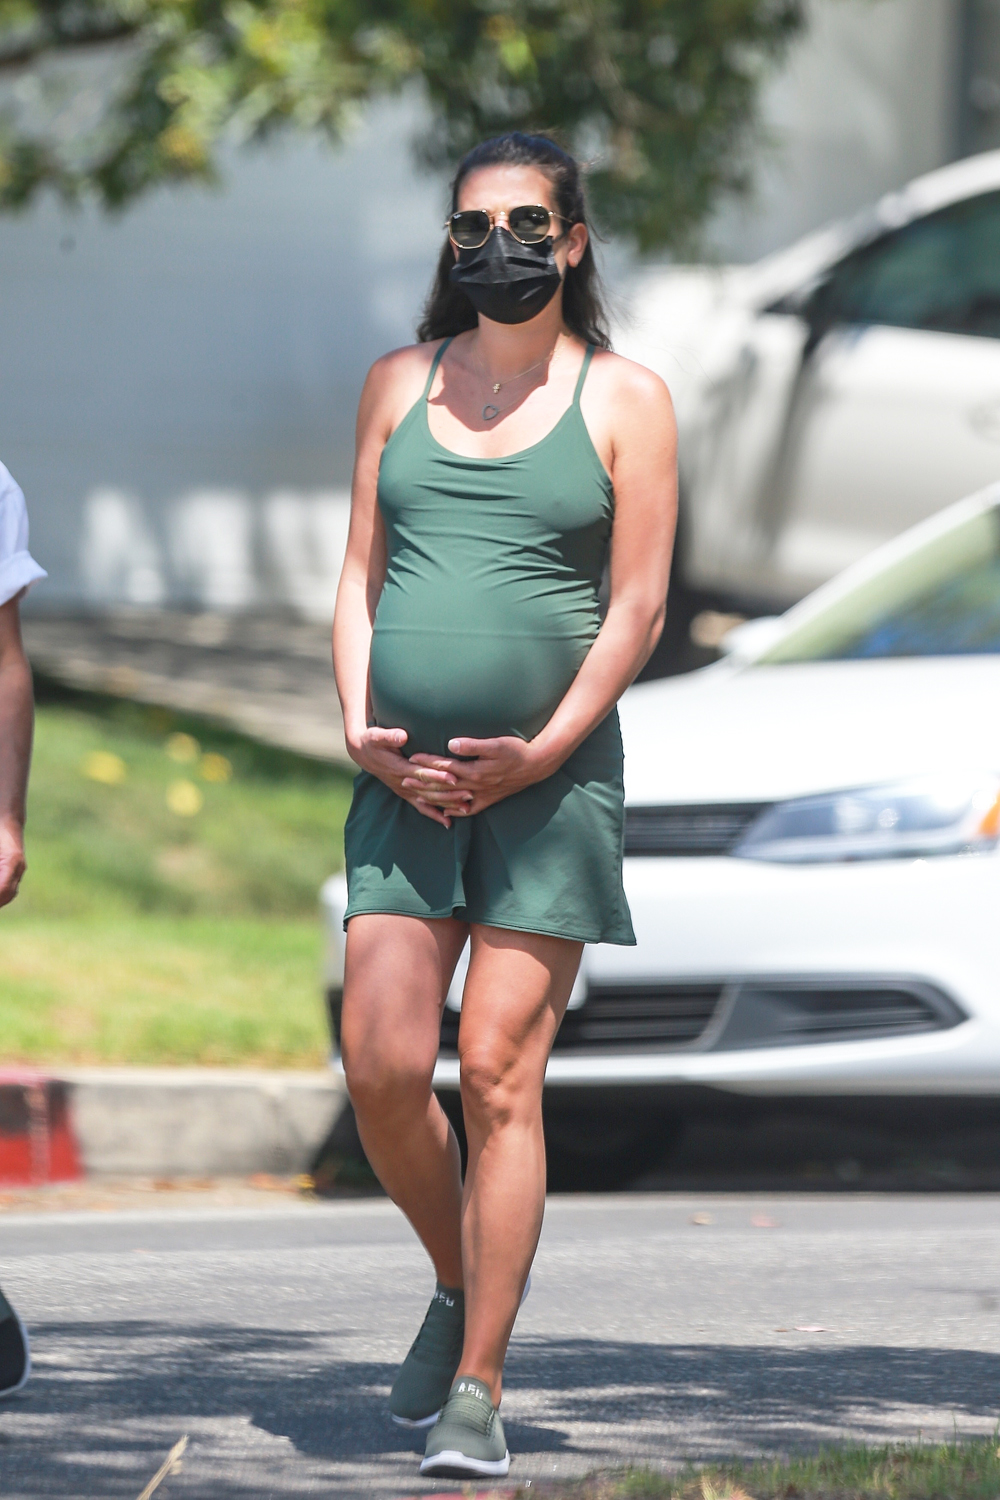 Santa Monica, CA - *EXCLUSIVE* Pregnant Lea Michele wears a protective mask while holding her growing belly as she steps out for a walk in Santa Monica with her mother Edith Sarfati, as Governor Gavin Newsom orders another round of shutdowns for California. Lea was seen in a green dress and sneakers out for a walk a day after authorities found the co-star's body of Glee, Naya Rivera, who drowned in Lake Piru.: Lea MicheleBACKGRID USA JULY 14, 2020 USA: +1 310 798 9111 / usasales@backgrid.comUK: +44 208 344 2007 / uksales@backgrid.com British - Images containing childrenPlease pixelate face before posting*